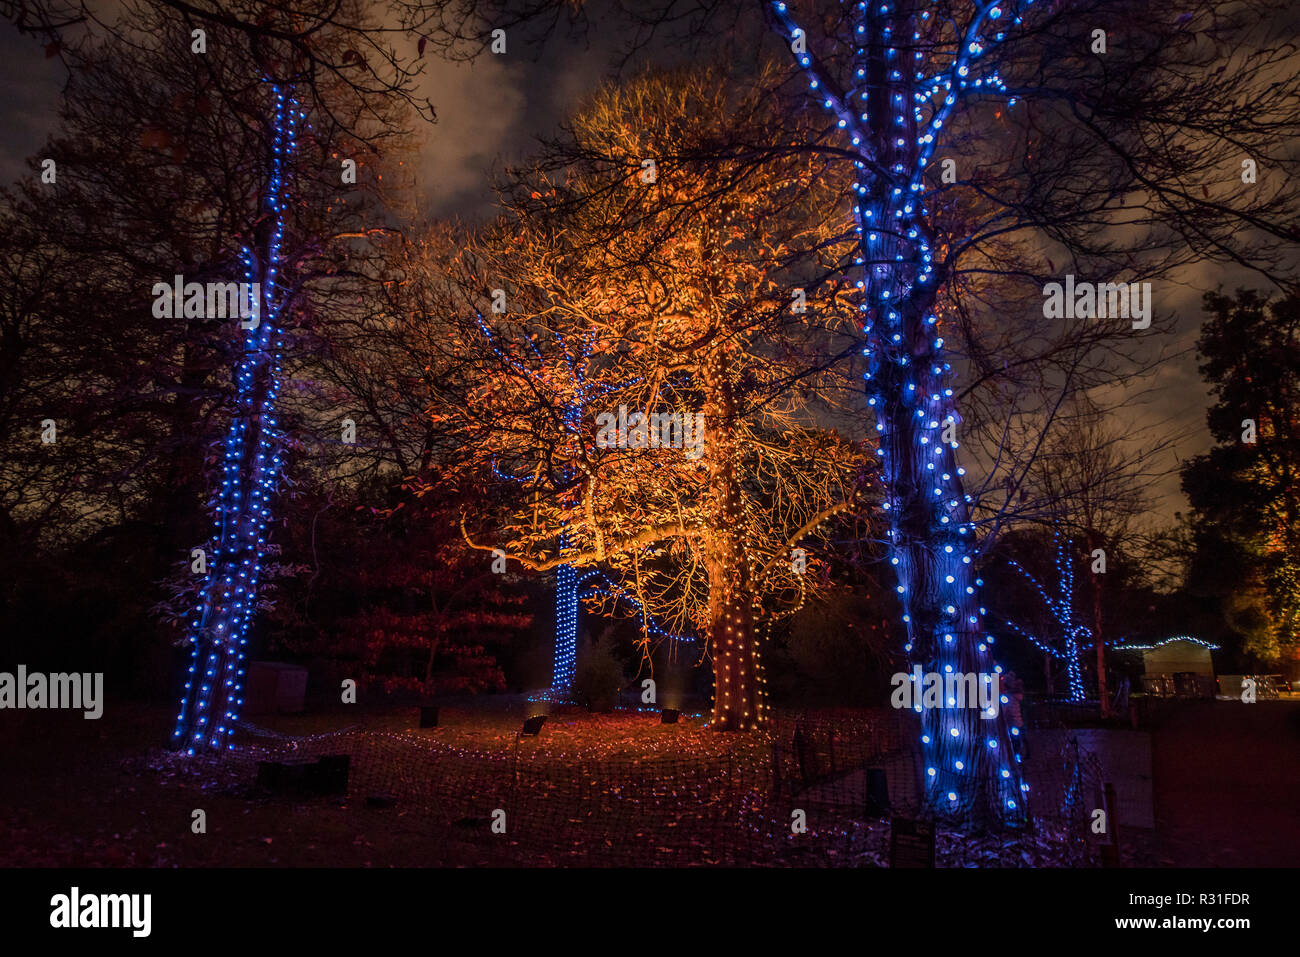 Kew Gardens, London, UK. 21st Nov 2018.Kew at Christmas, Kew Gardens - Anl illuminated trail through Kew’s after-dark landscape, lit up by over one million twinkling lights. Credit: Guy Bell/Alamy Live News Stock Photo